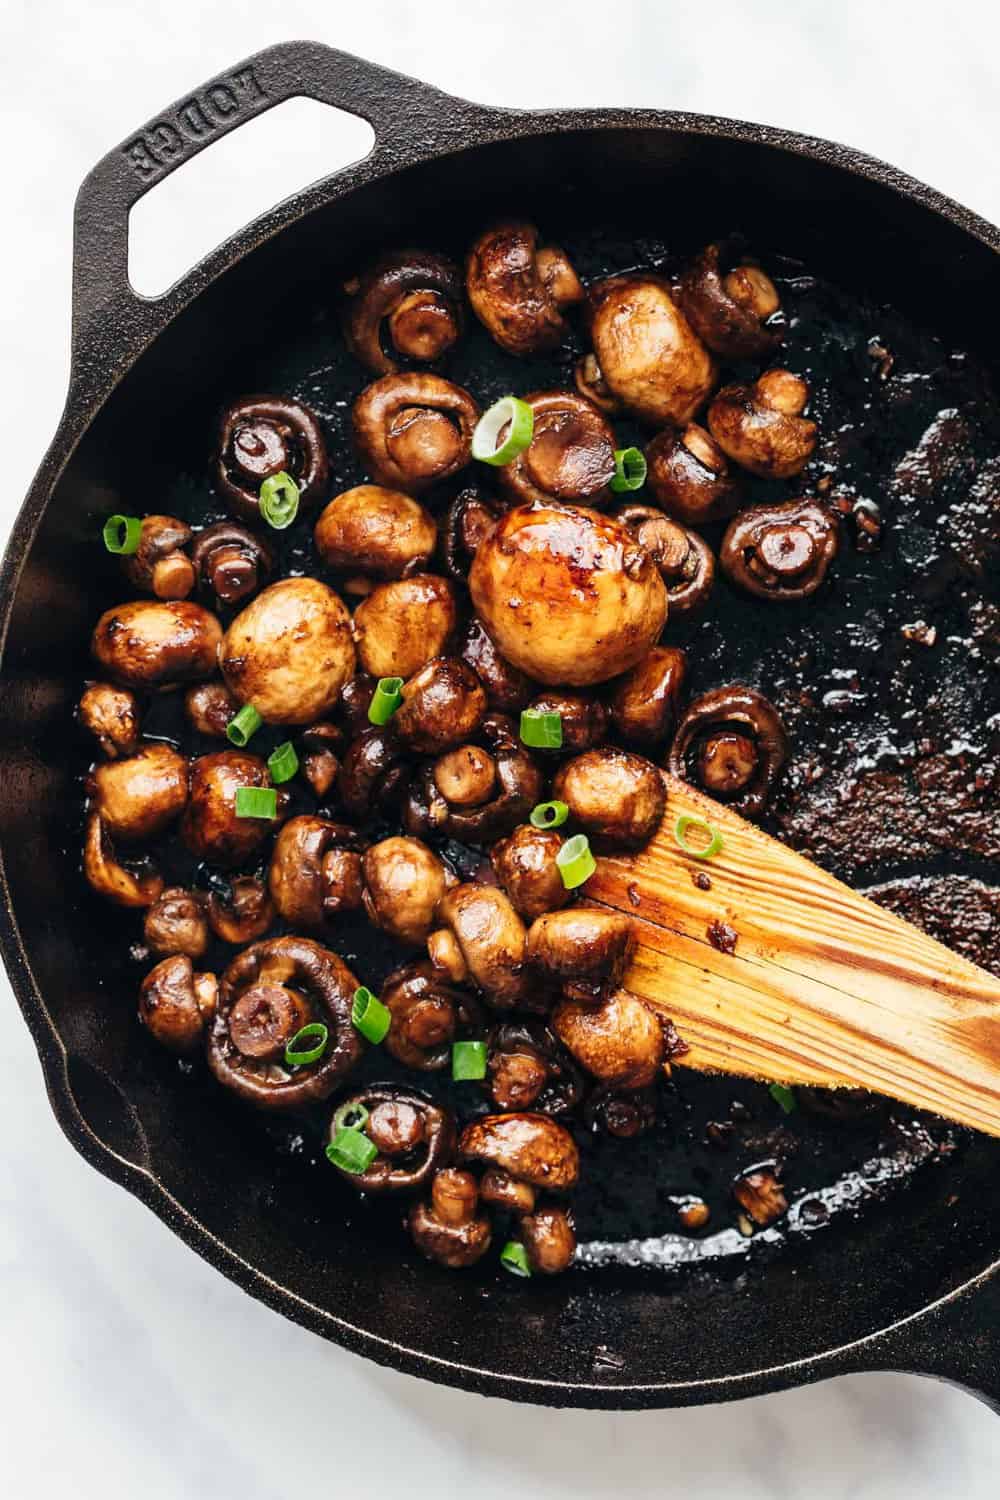 Garlic Balsamic Mushrooms straight out of the pan